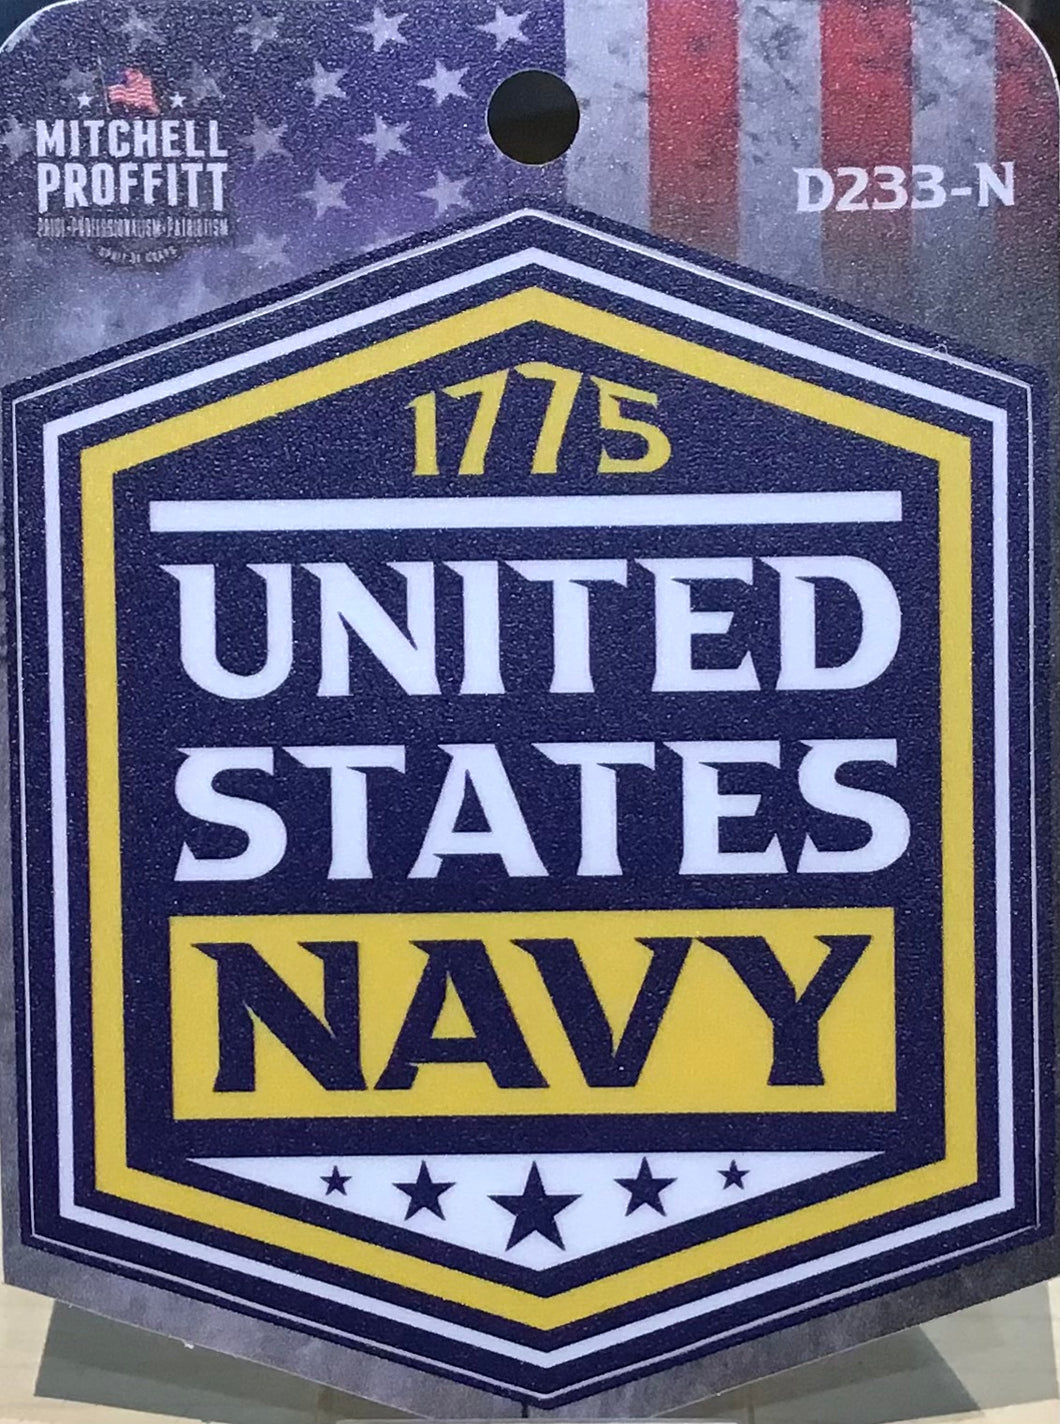 United States Navy 1775 Stickers